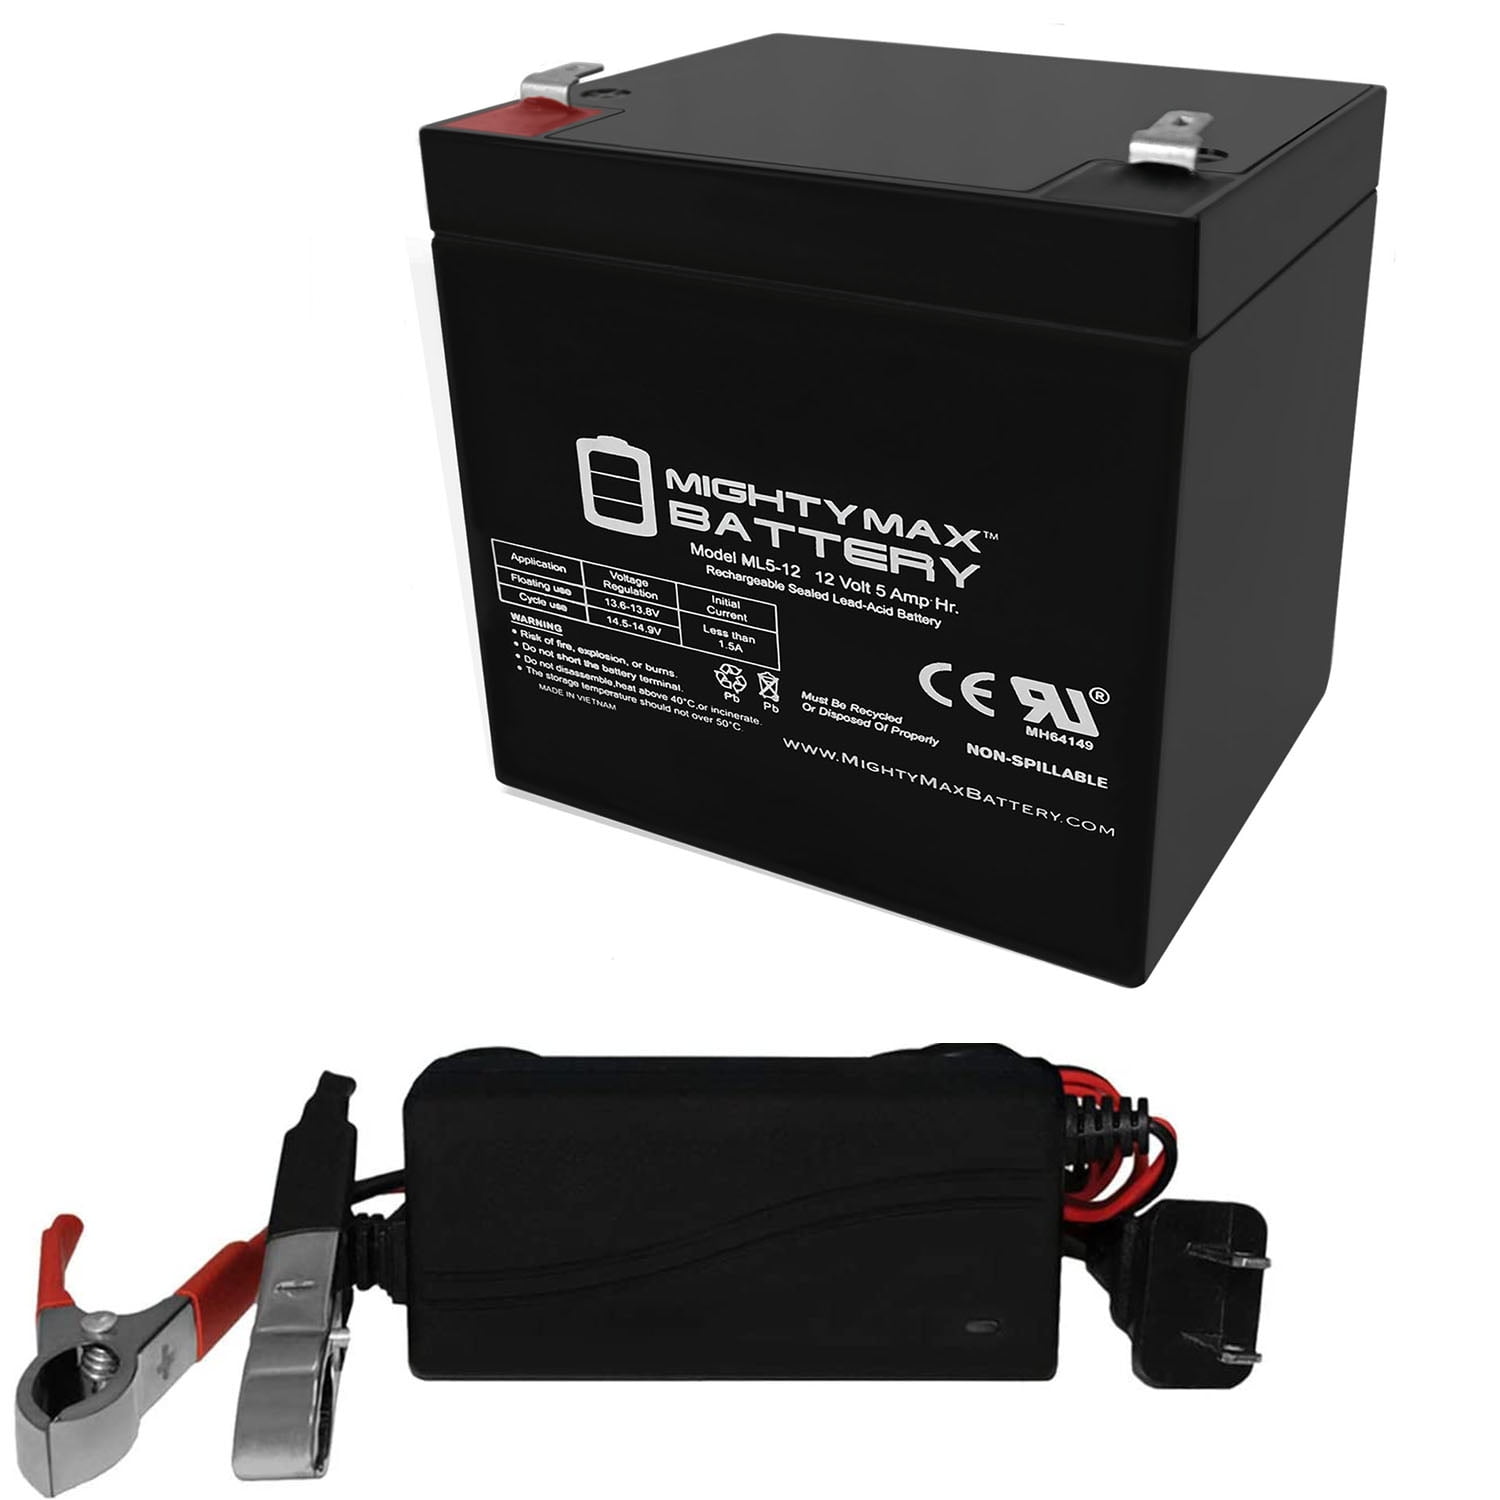 Battery Eliminator - A23, 1 Cell, 12VDC - AC Source - Battery Replacement